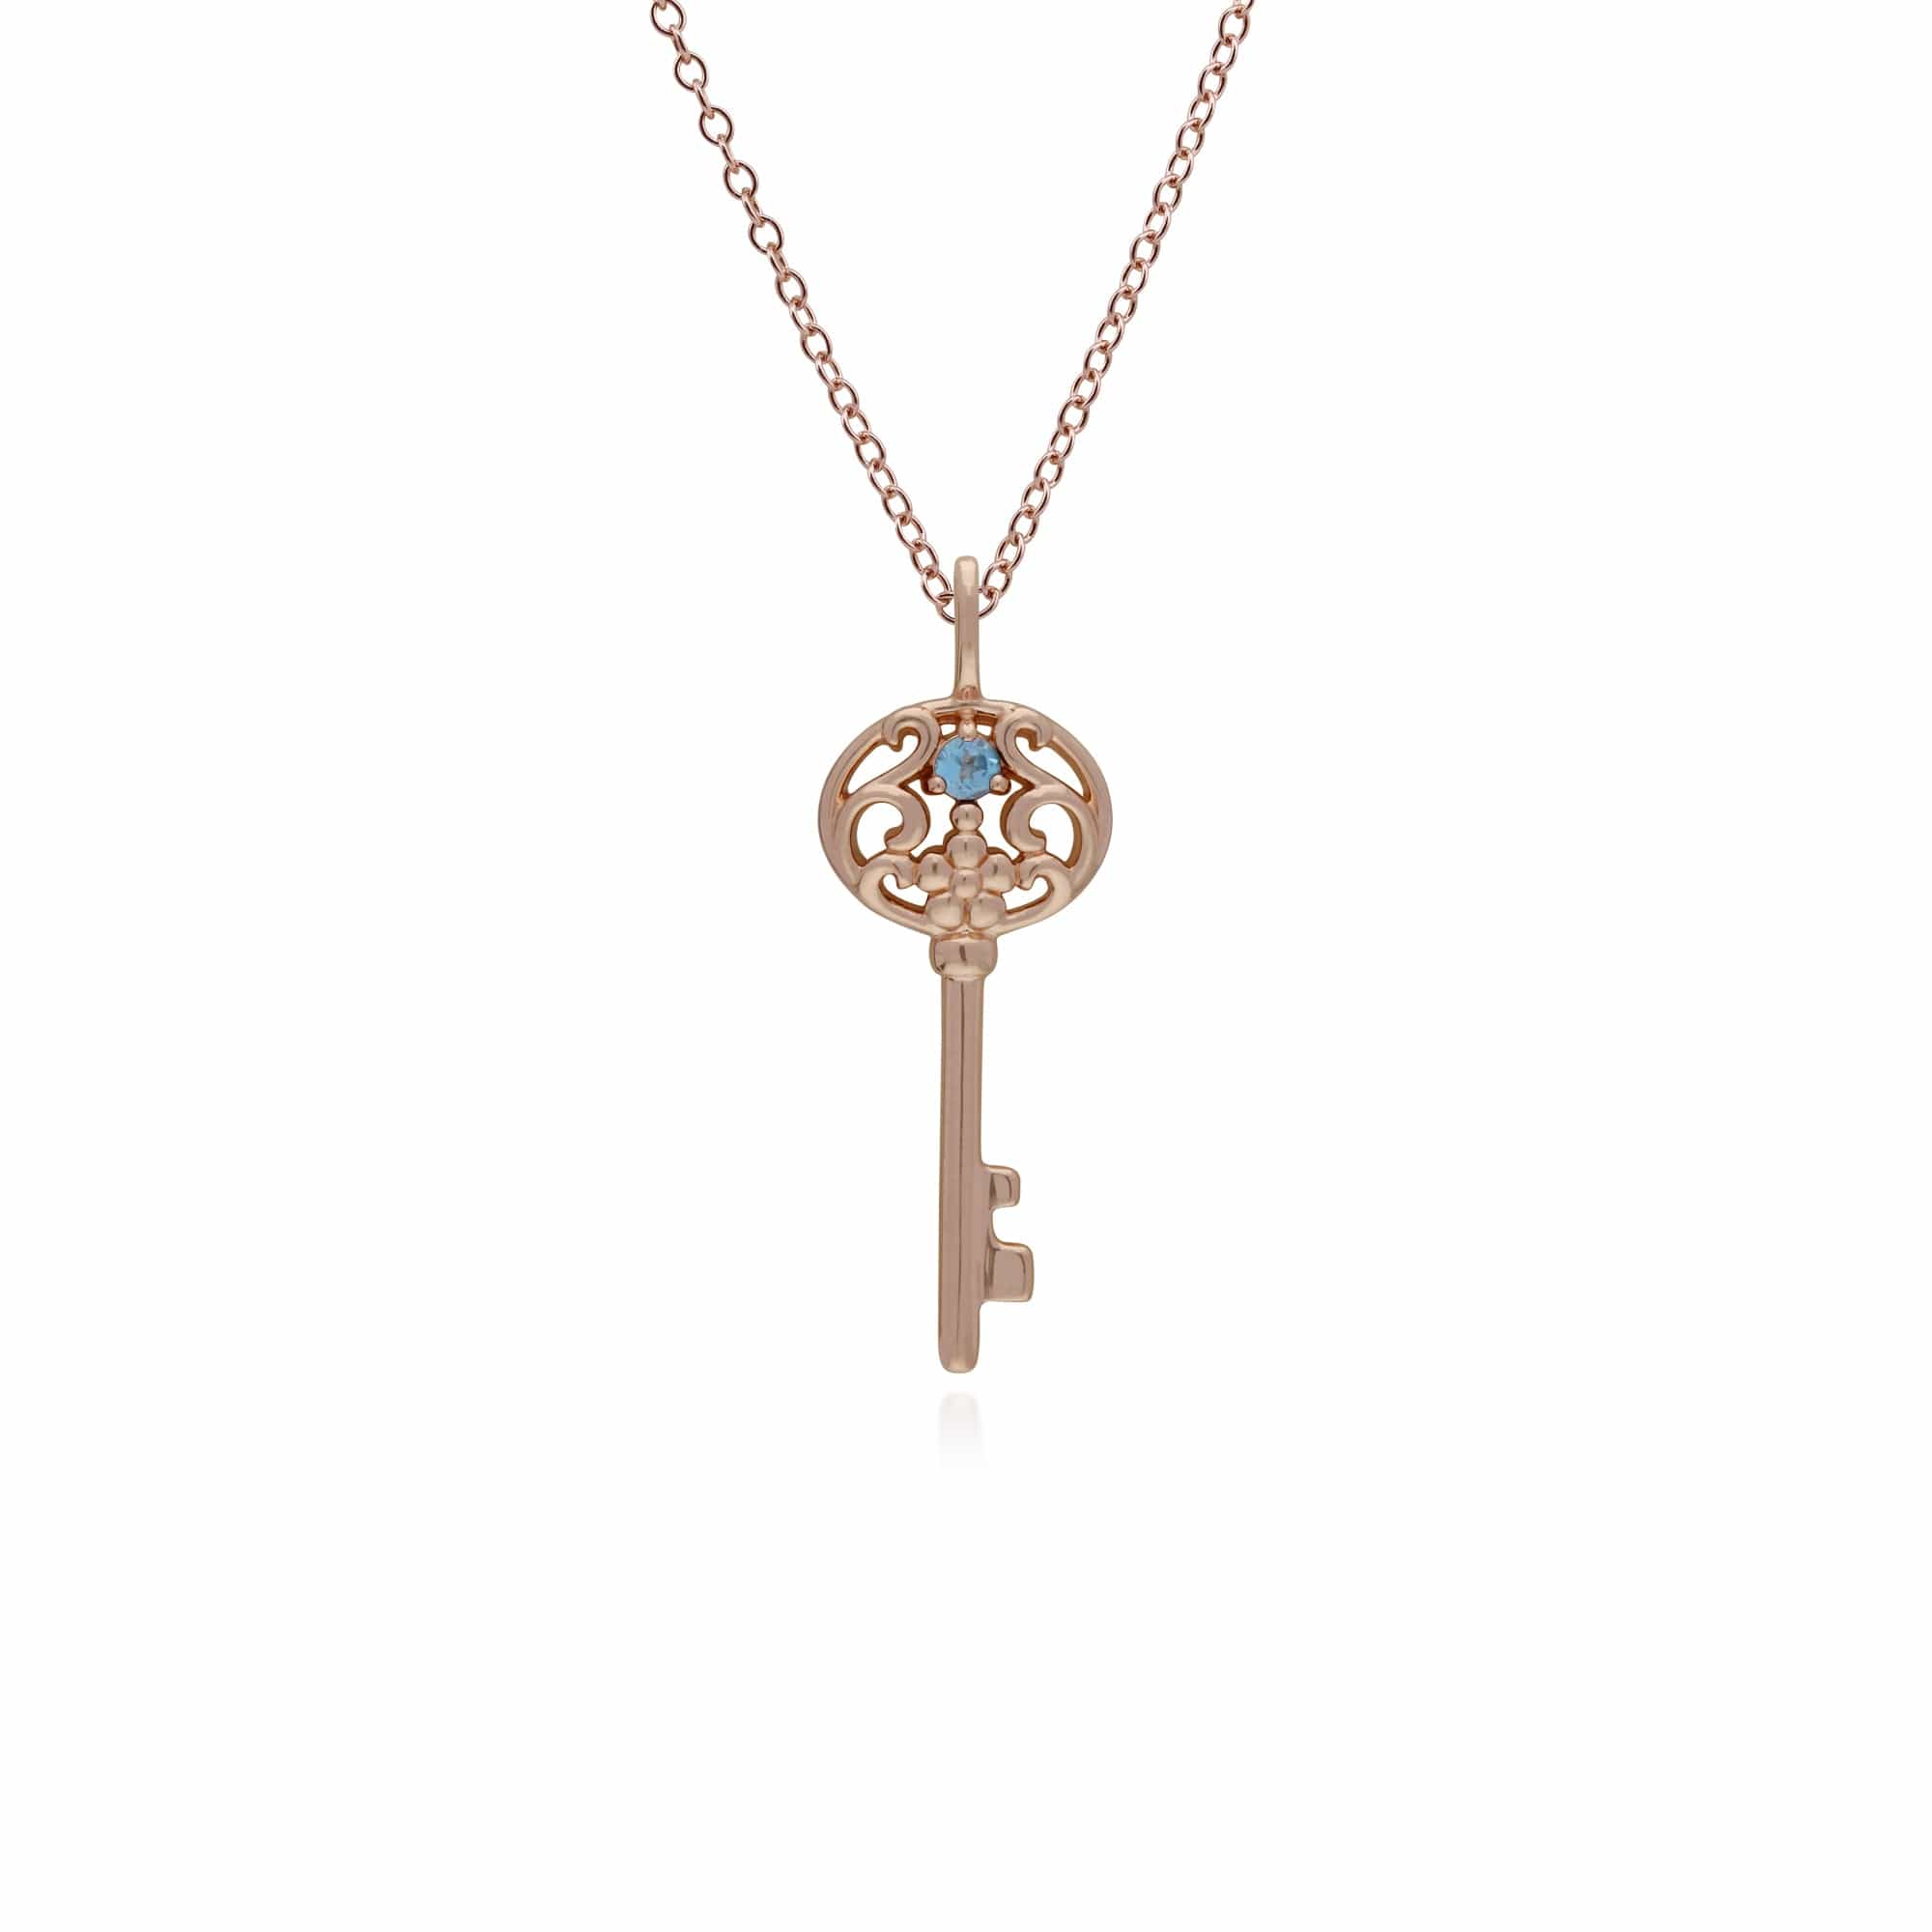 270P026706925-270P026901925 Classic Heart Lock Pendant & Blue Topaz Big Key Charm in Rose Gold Plated 925 Sterling Silver 2